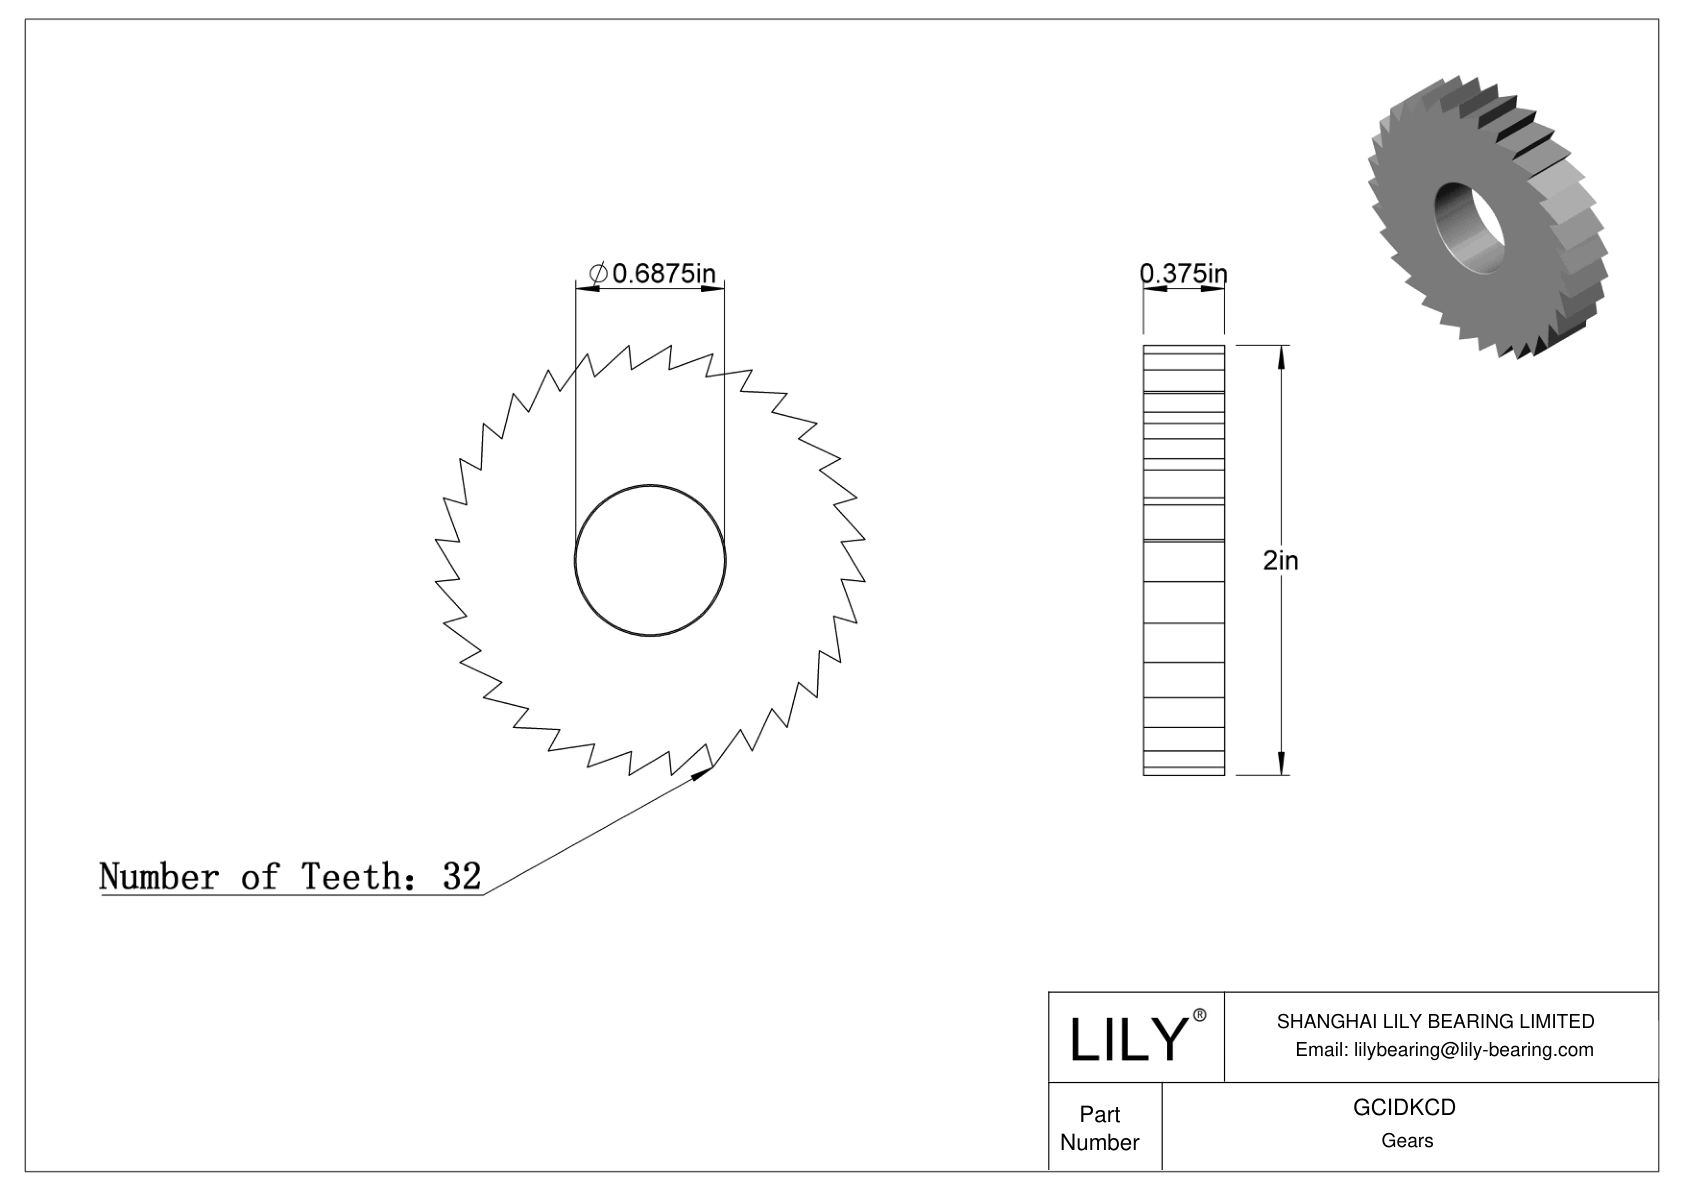 GCIDKCD Gears cad drawing